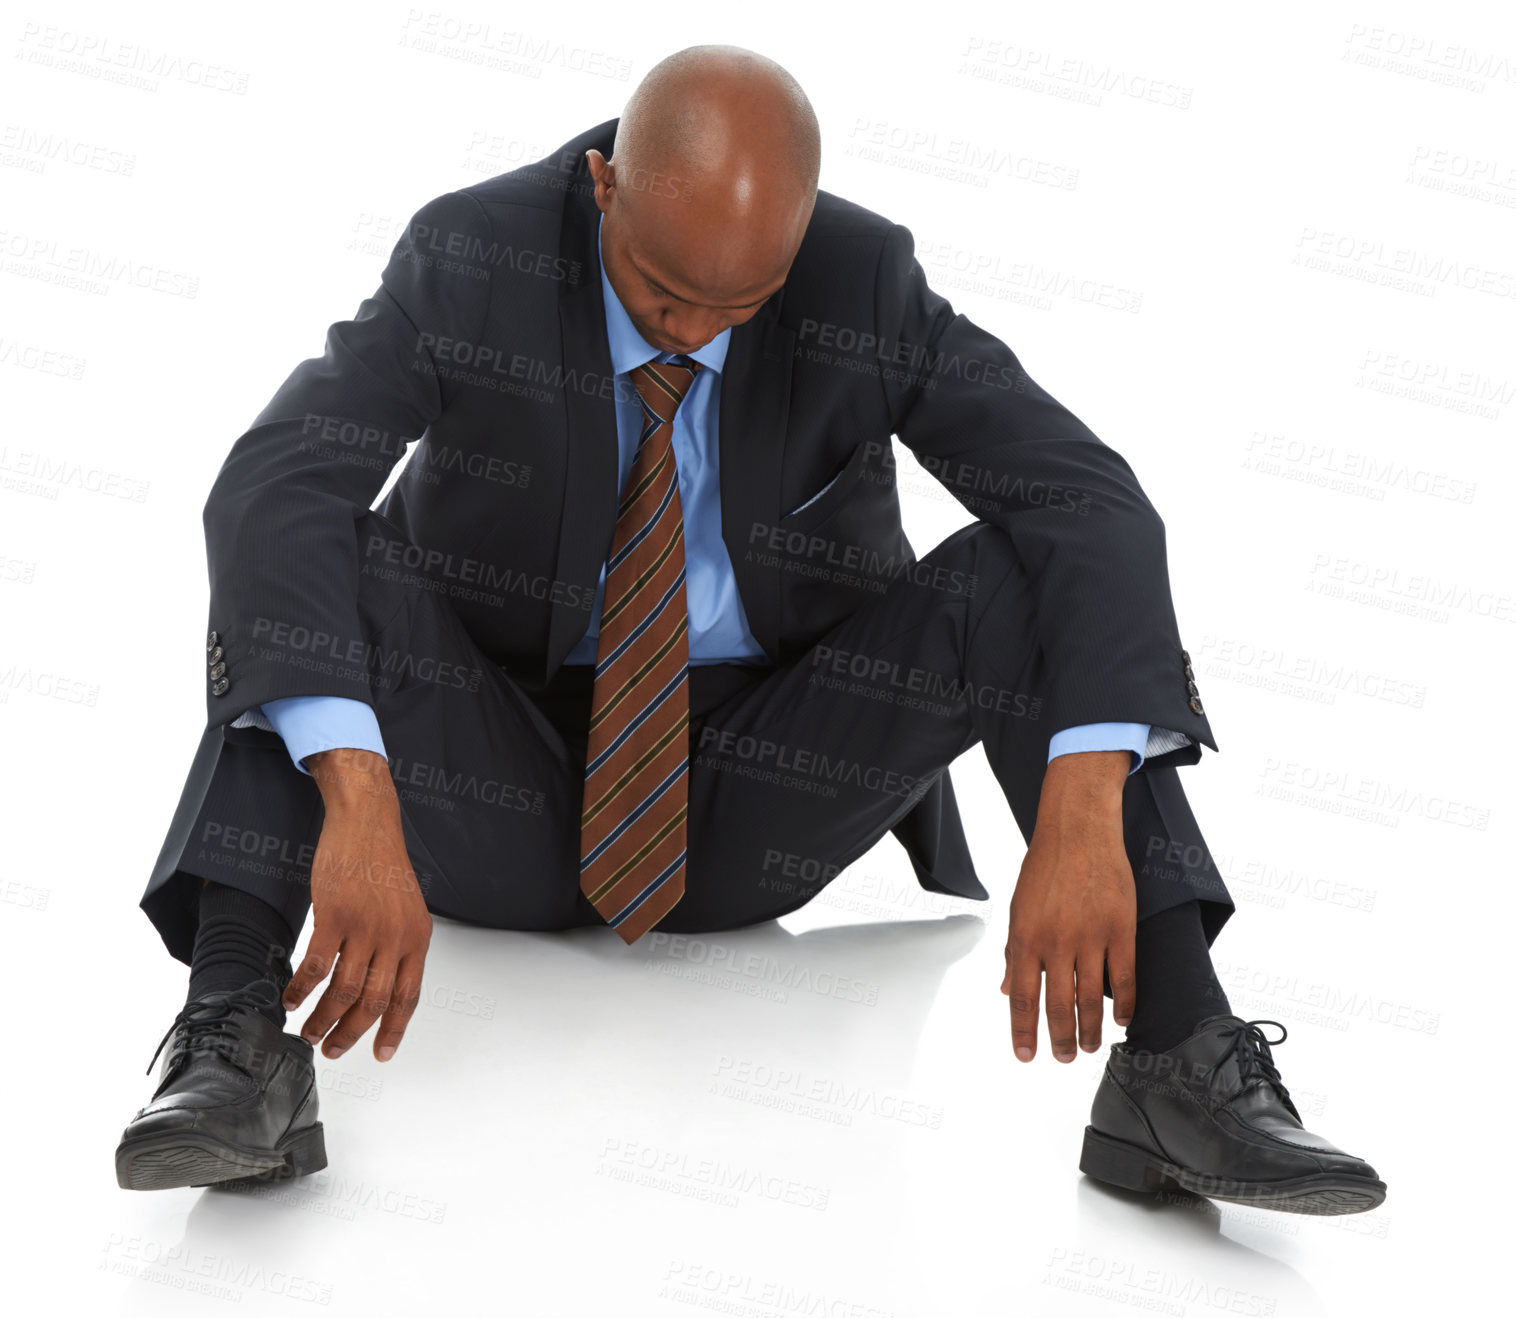 Buy stock photo Depression, unemployment or fail with business black man on floor of studio isolated on white background. Economy, financial crisis and employee in suit fired from career, job or work with stress